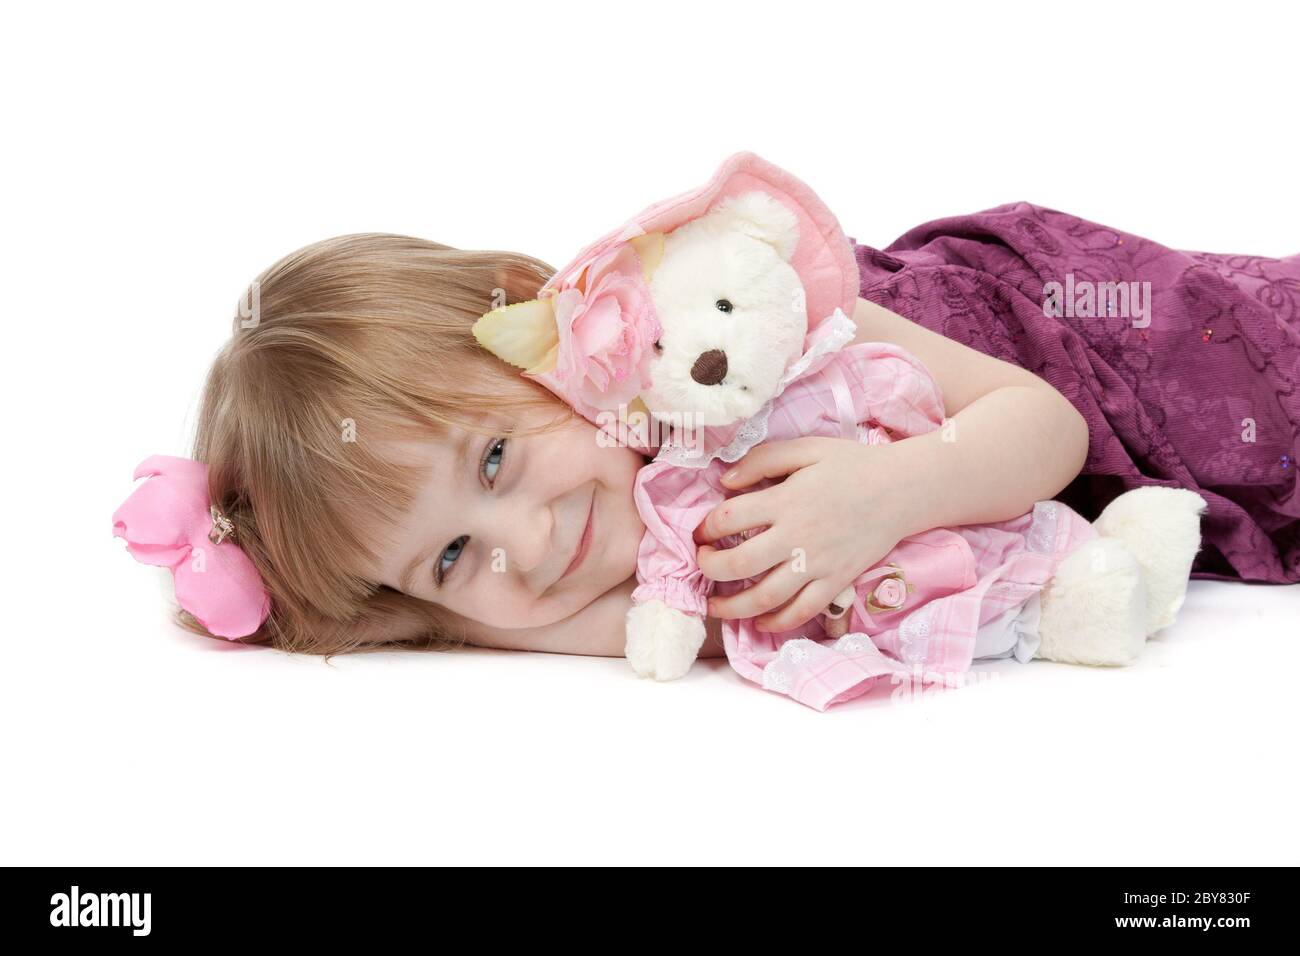 a little girl 4 years old with a plush toy bear Stock Photo